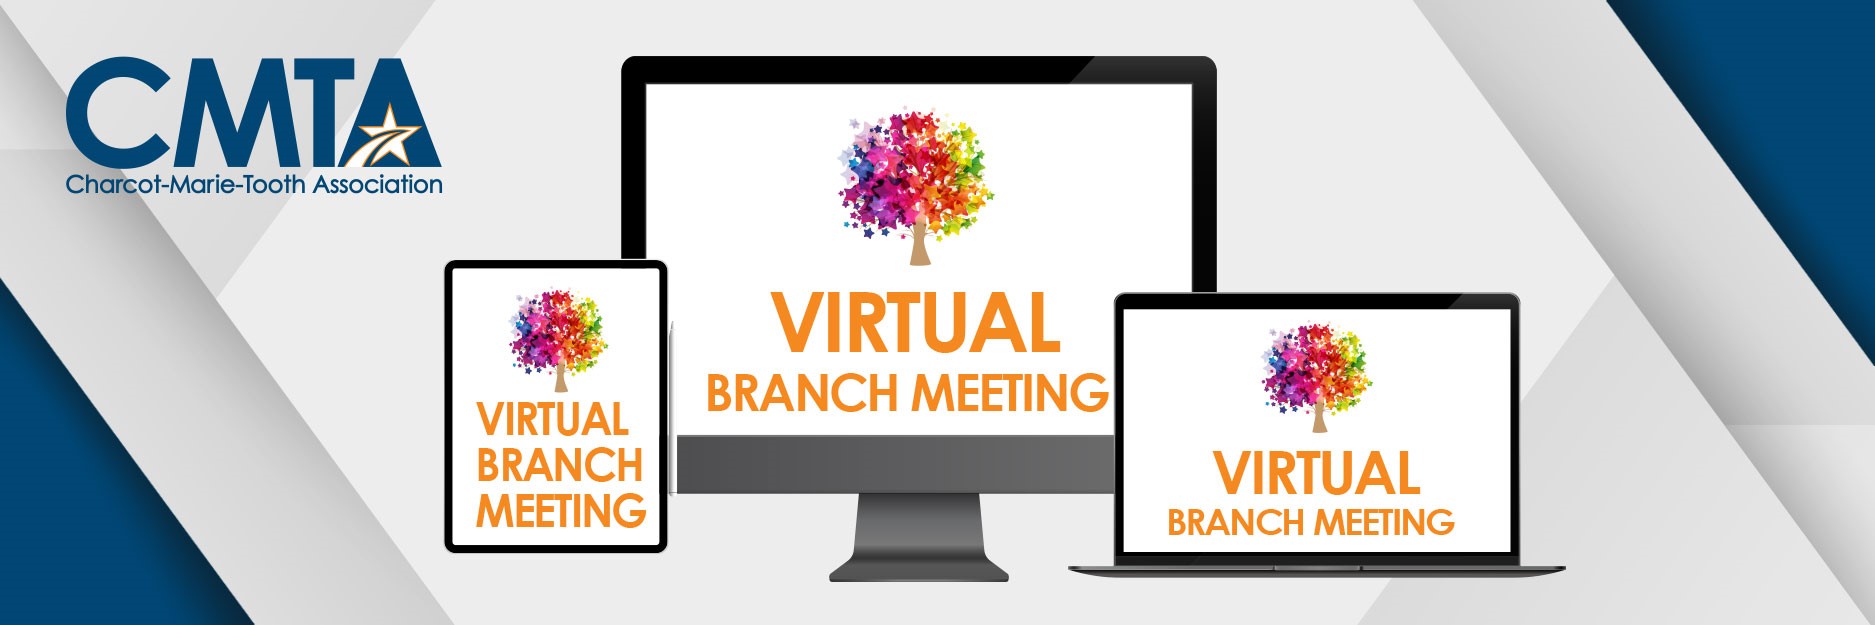 San Francisco Bay Area CMTA Branch Meeting (Virtual) with Guest Speakers